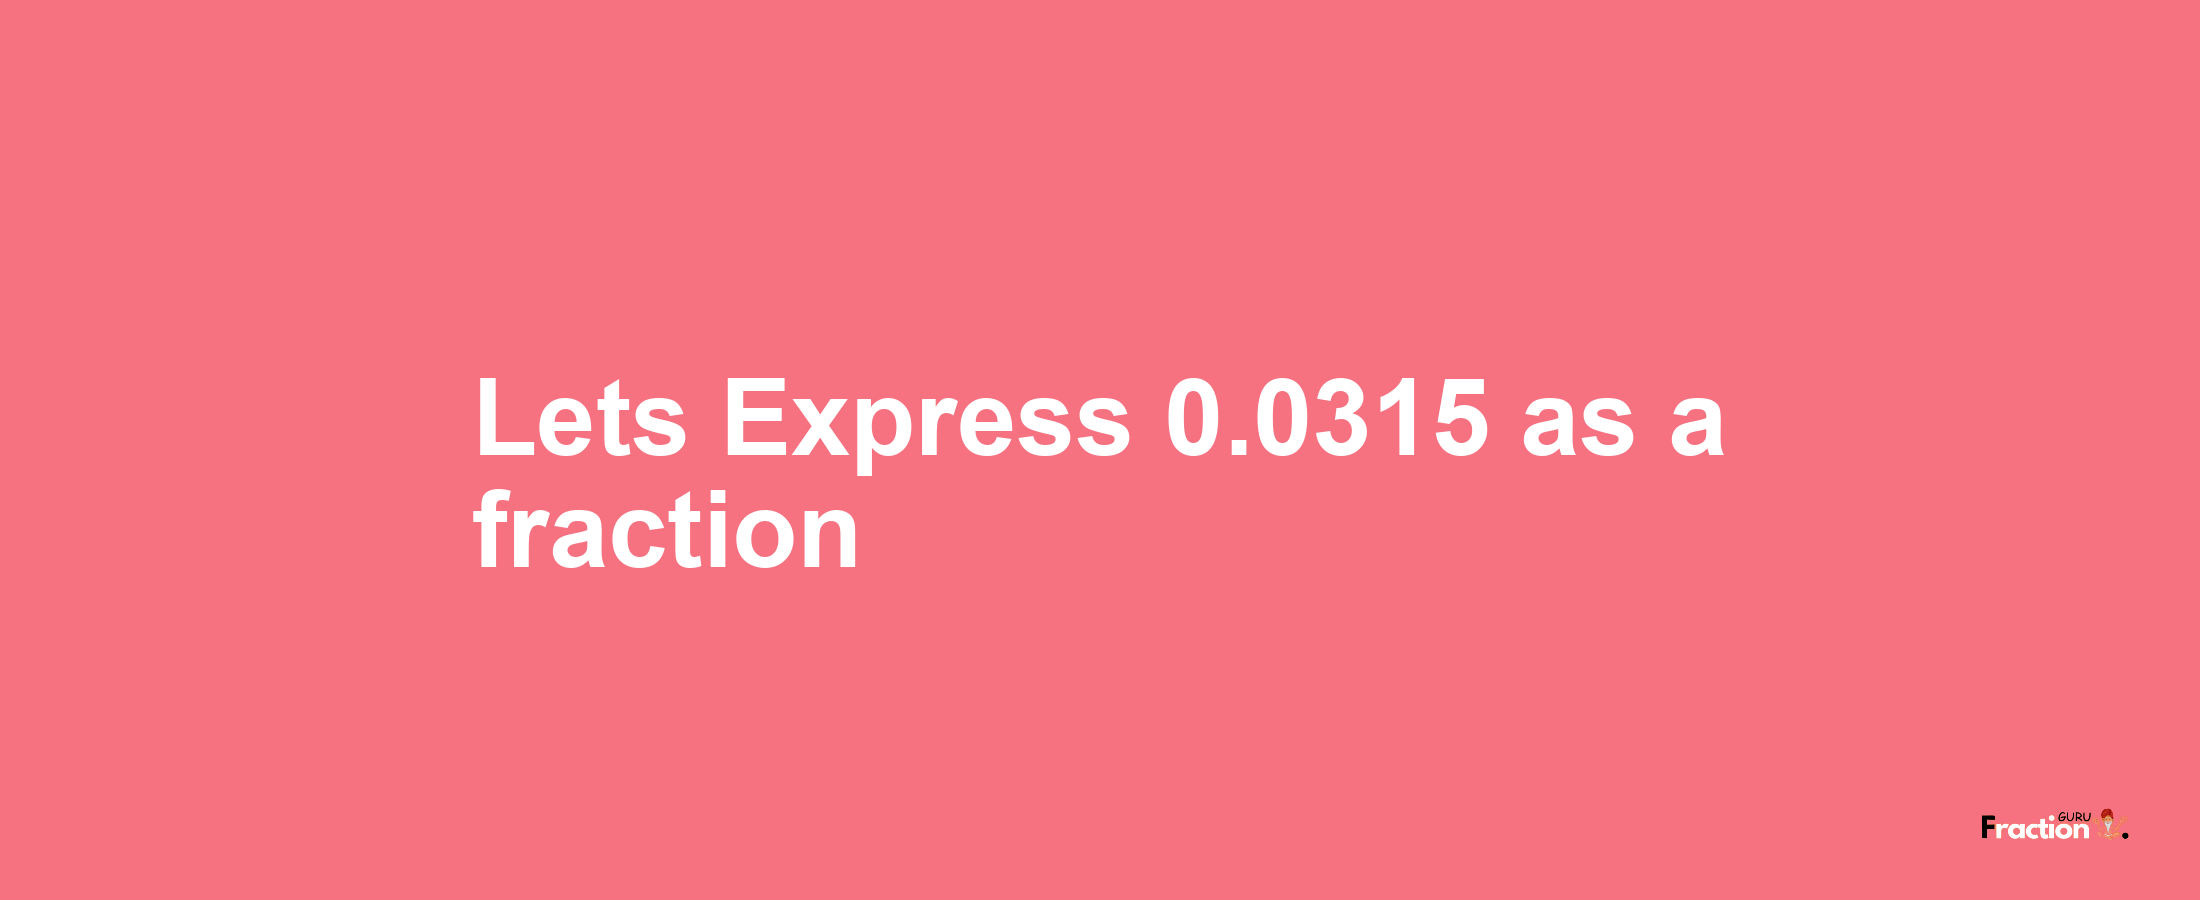 Lets Express 0.0315 as afraction